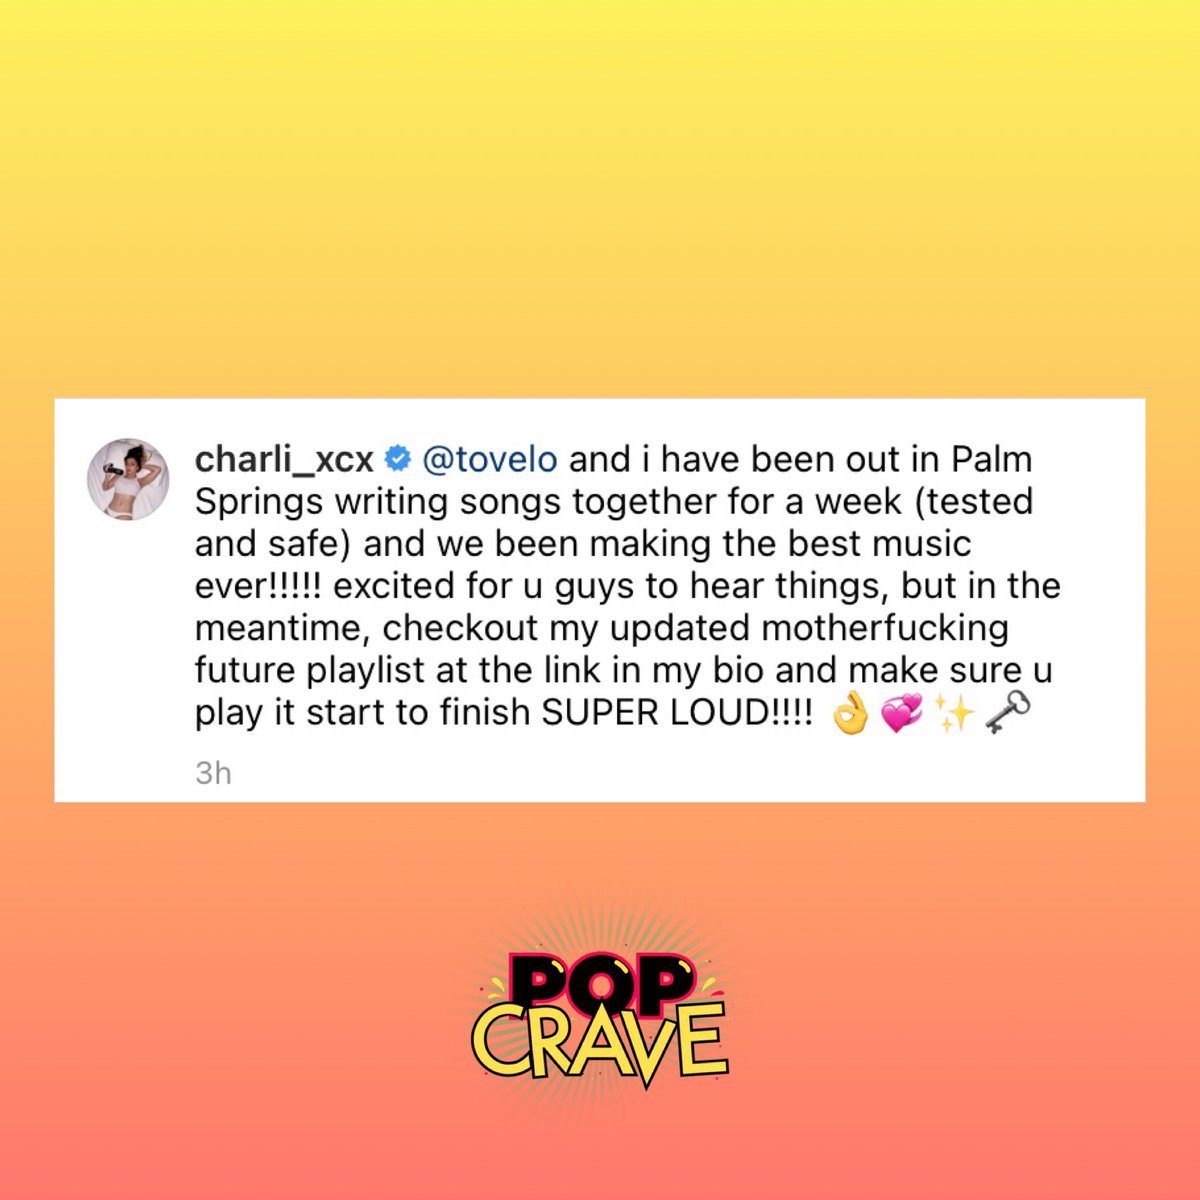 Charli XCX and Tove Lo are writing songs together in Palm Springs. 🌴